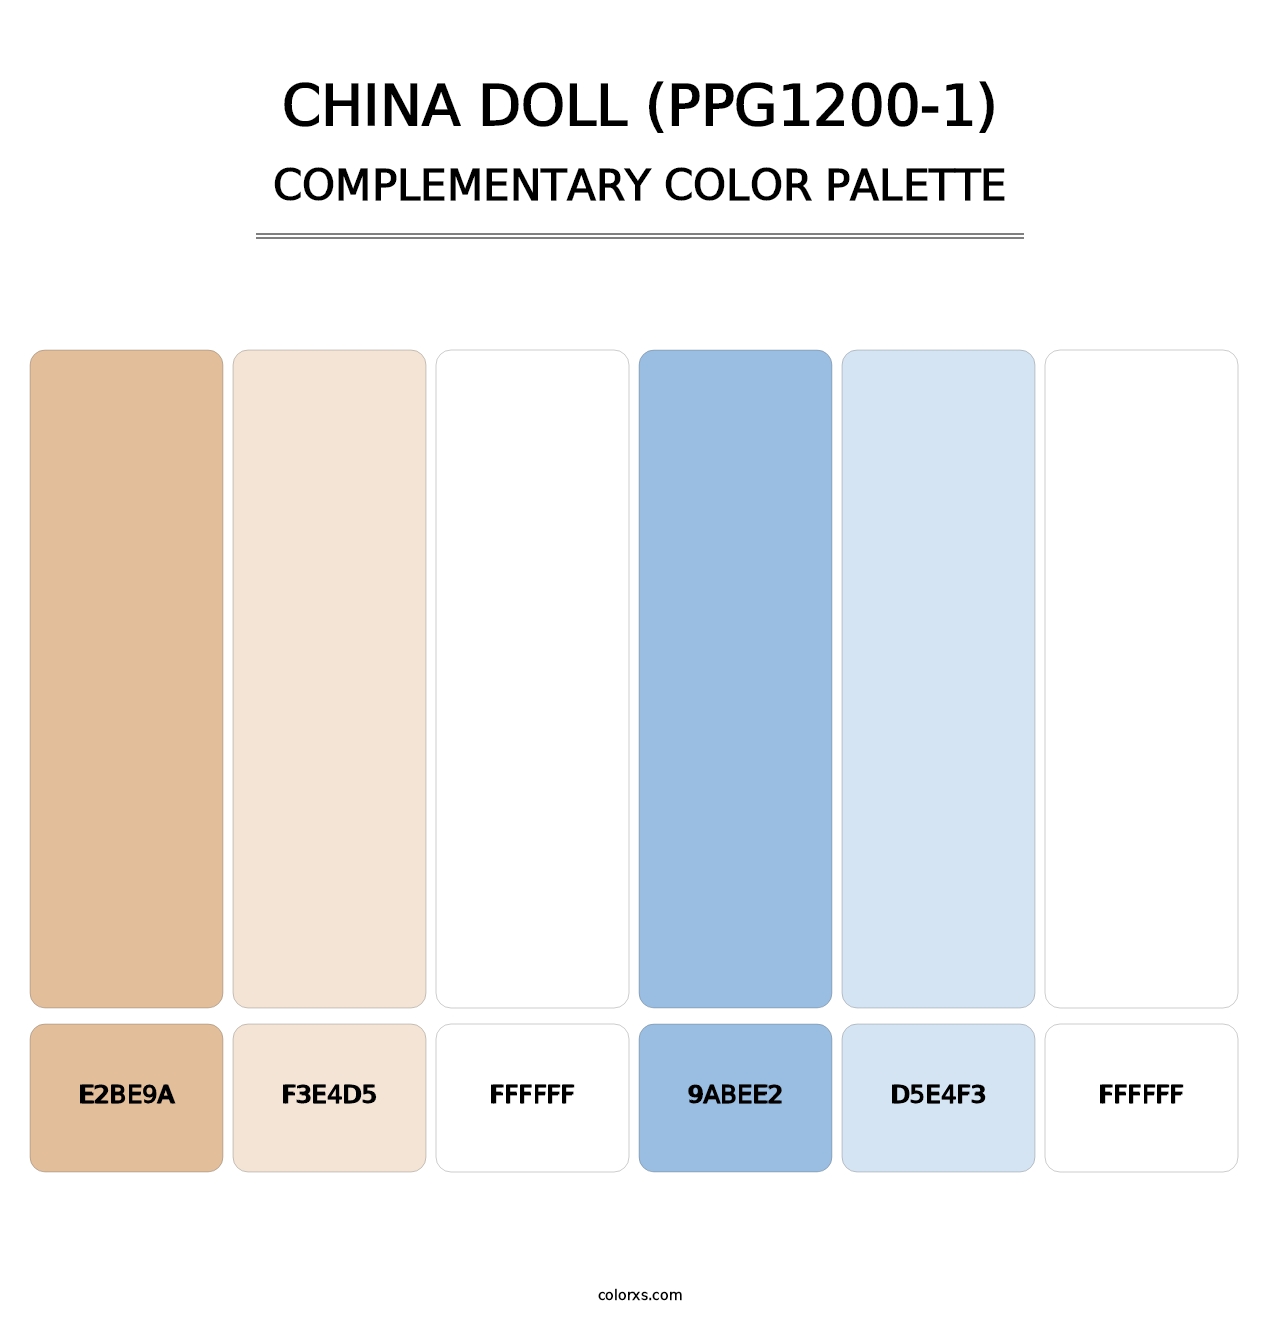 China Doll (PPG1200-1) - Complementary Color Palette